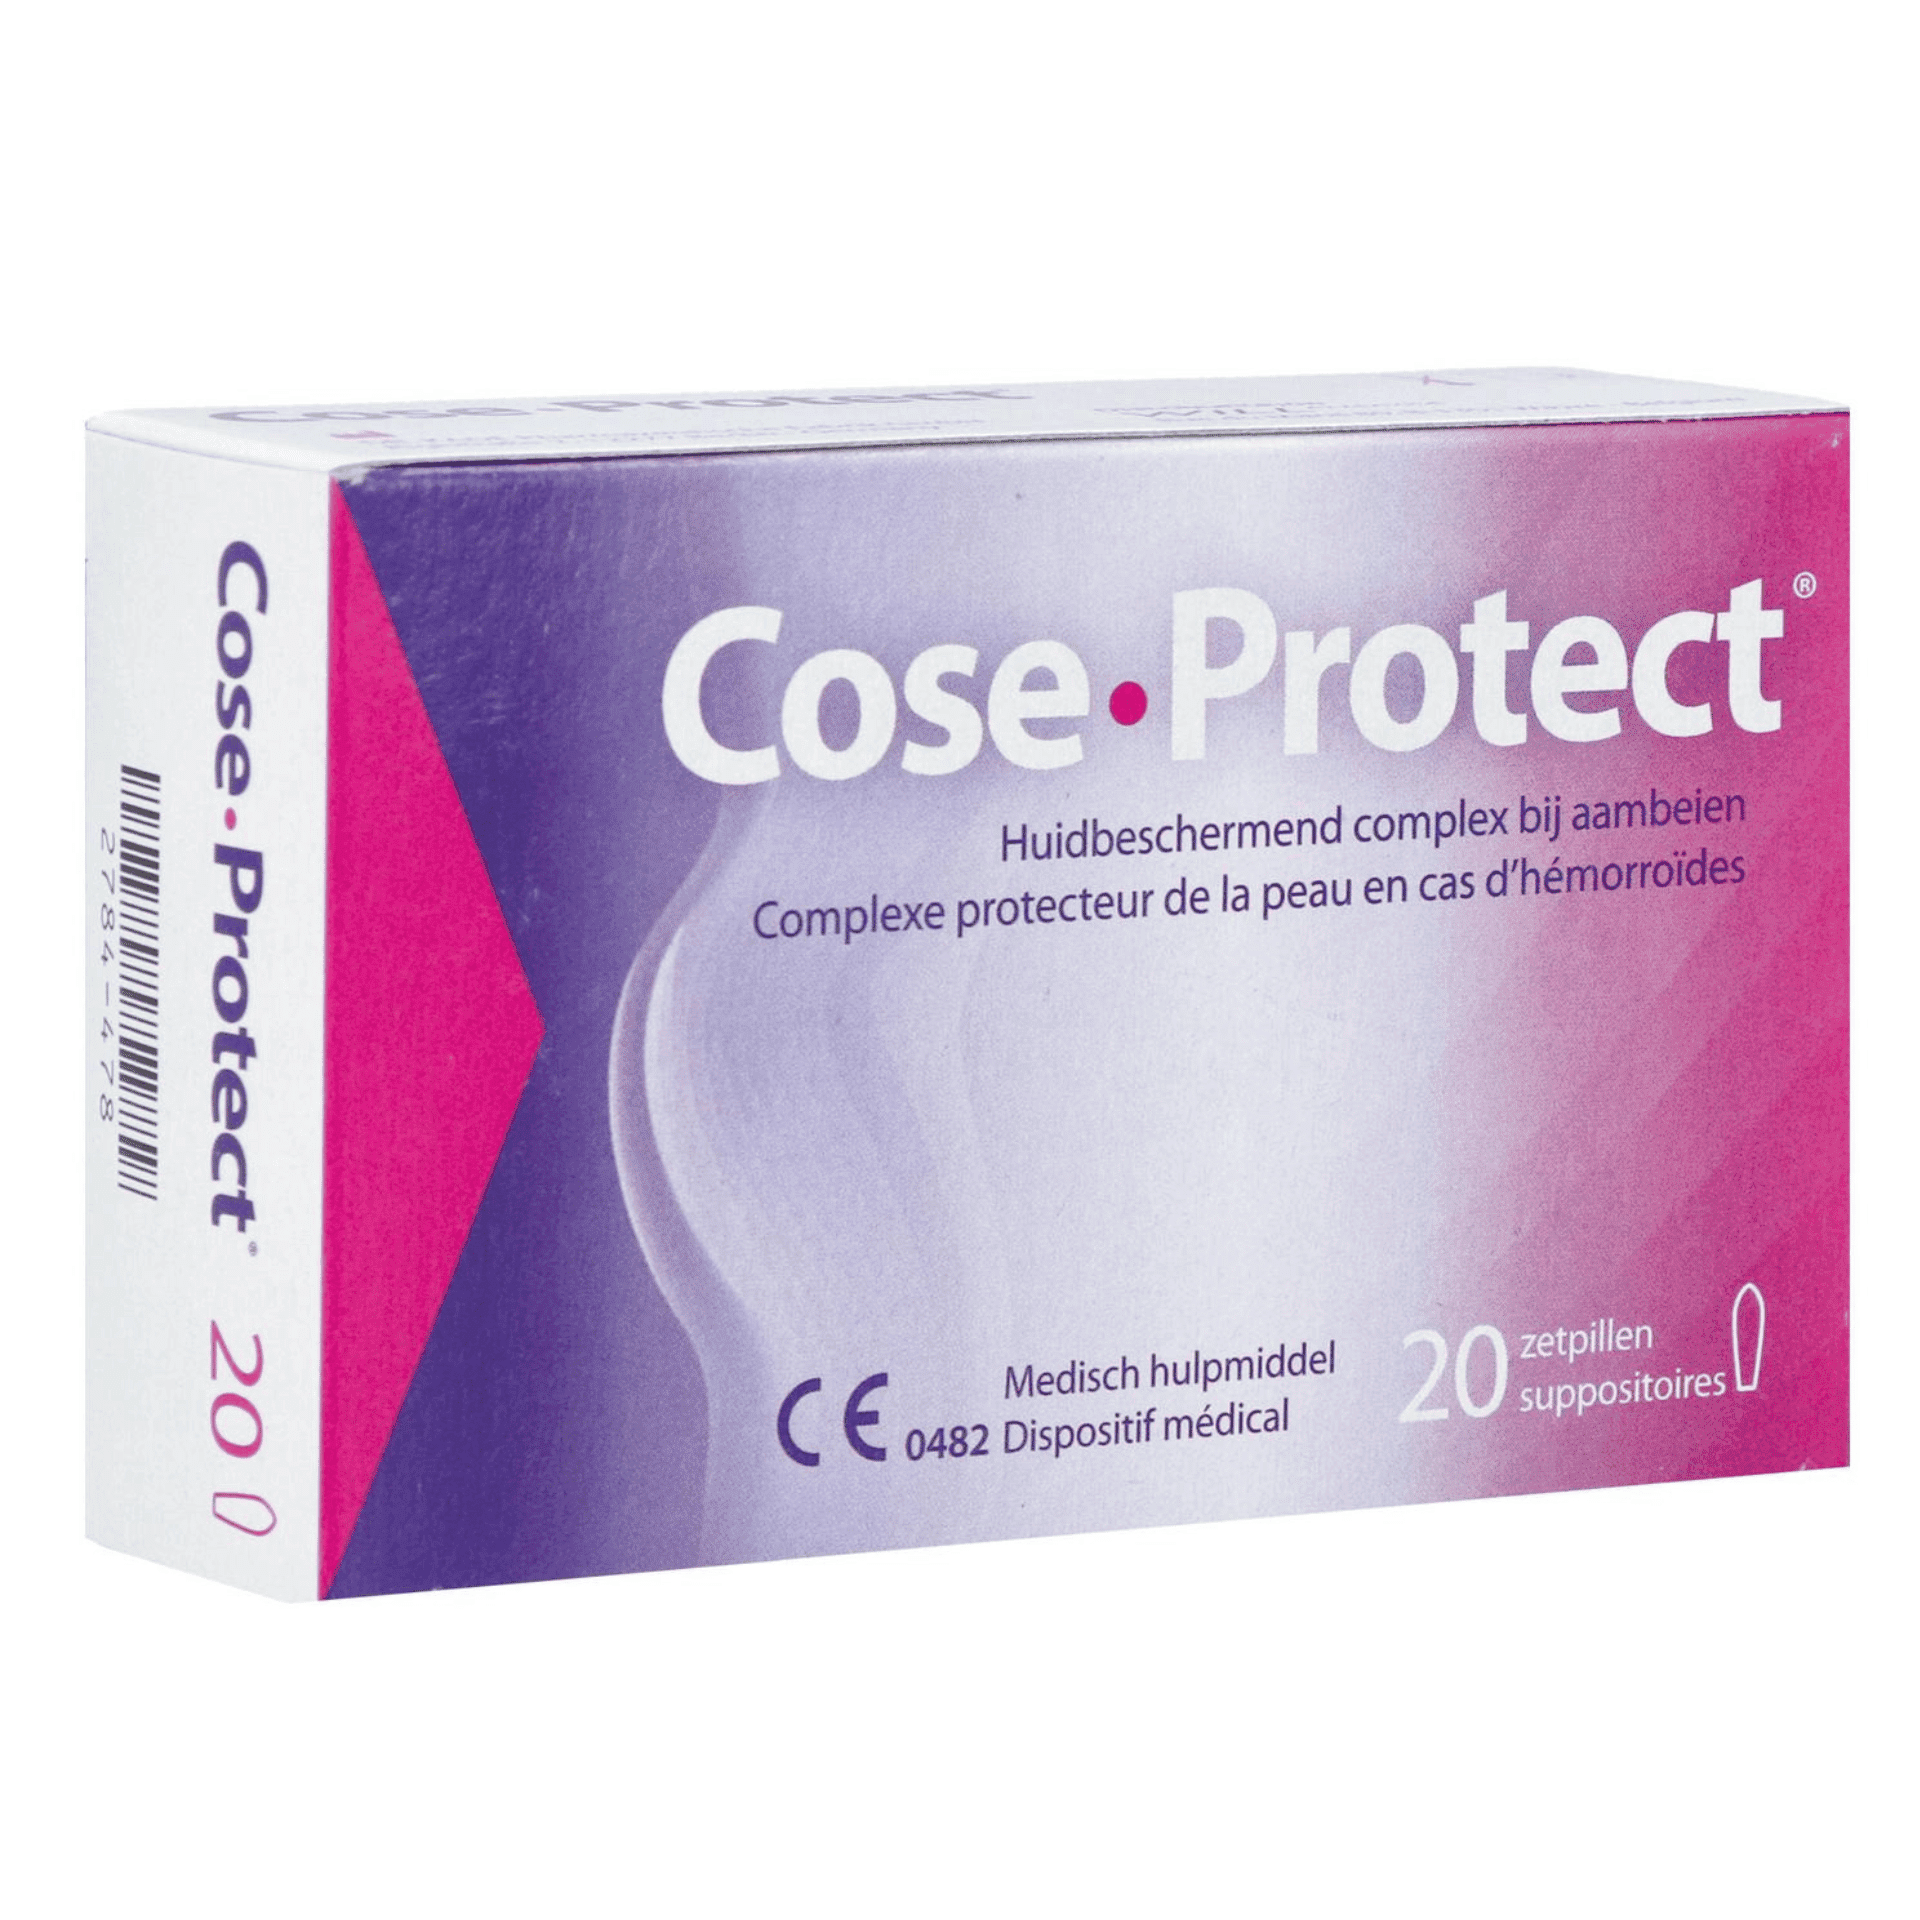 Cose-Protect